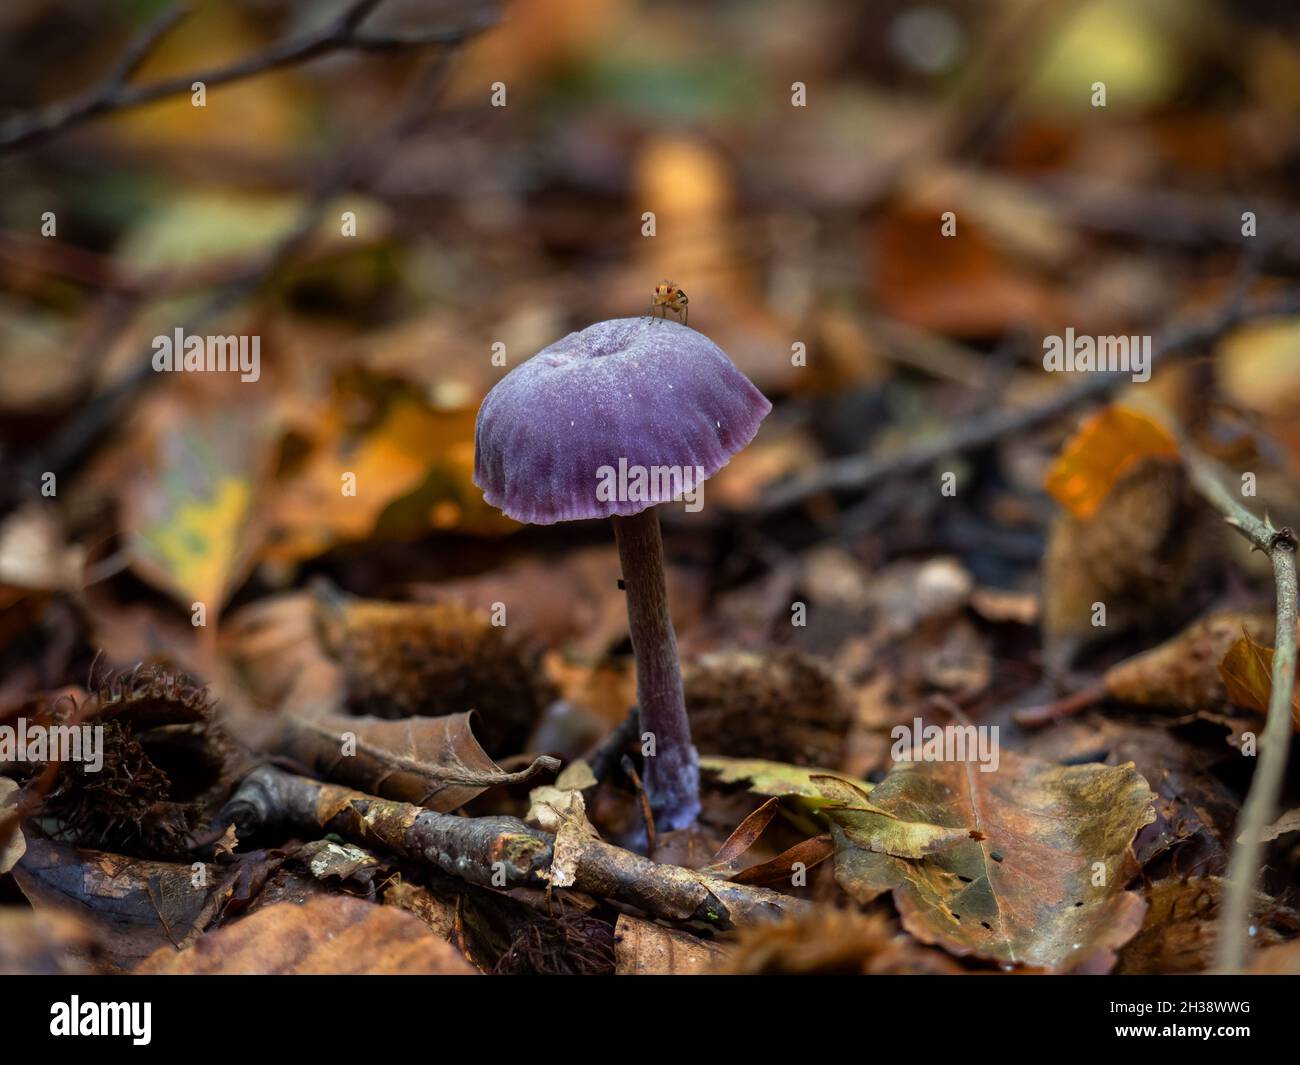 Purple fungus Amethyst Deceiver with fly on cap Stock Photo